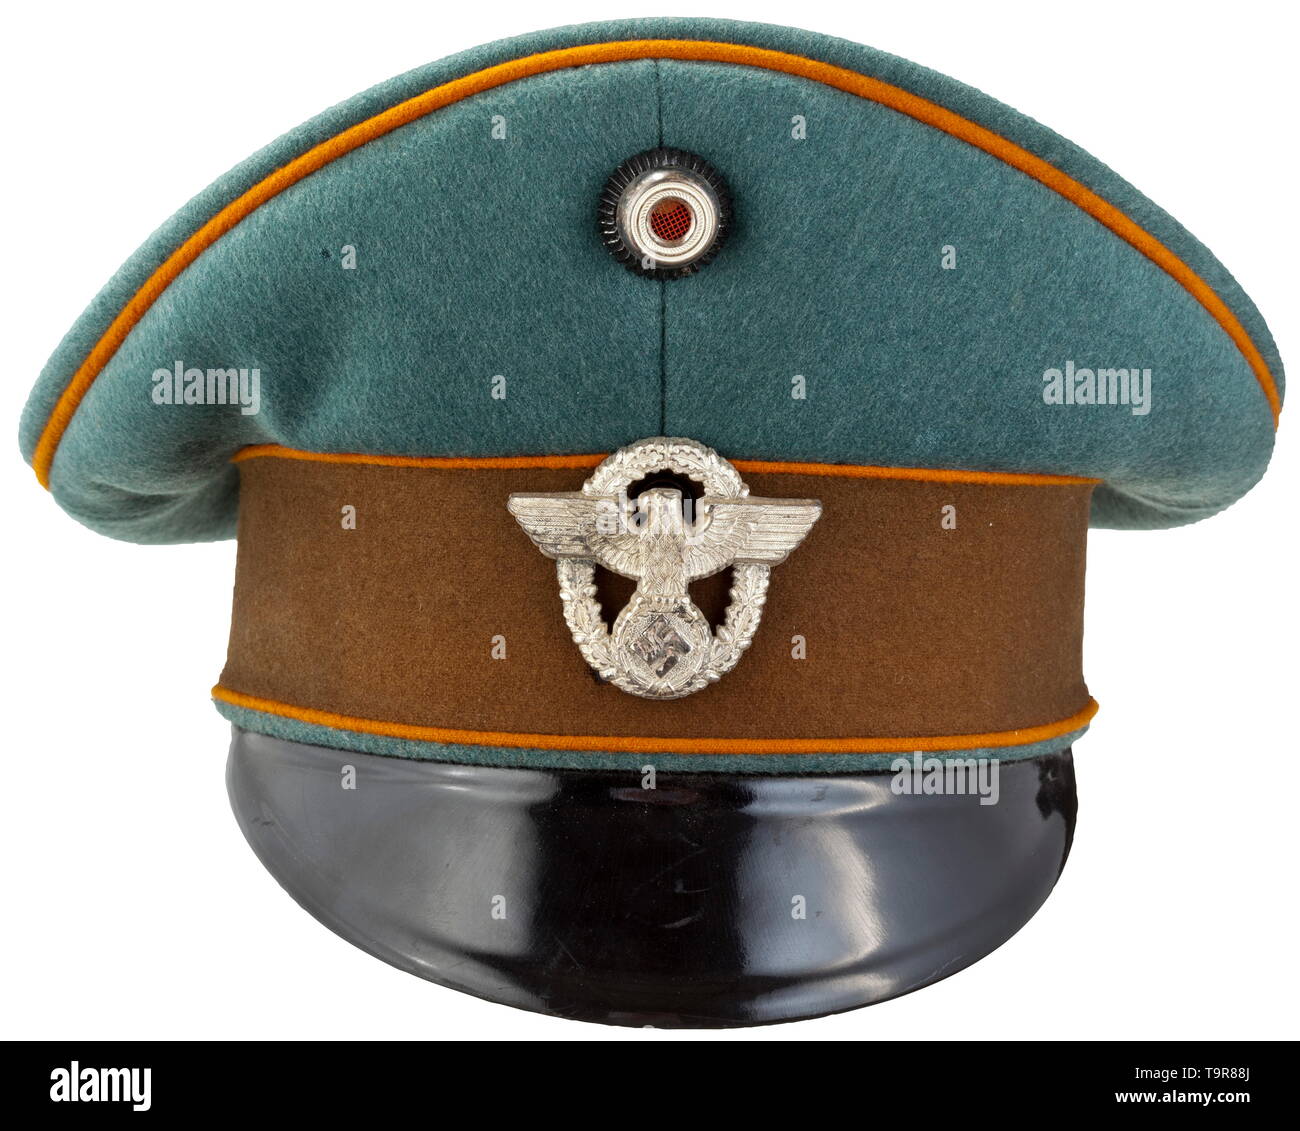 A visor cap for officers of the gendarmerie deluxe version 'Erel Sonderklasse Extra' historic, historical, 20th century, Additional-Rights-Clearance-Info-Not-Available Stock Photo